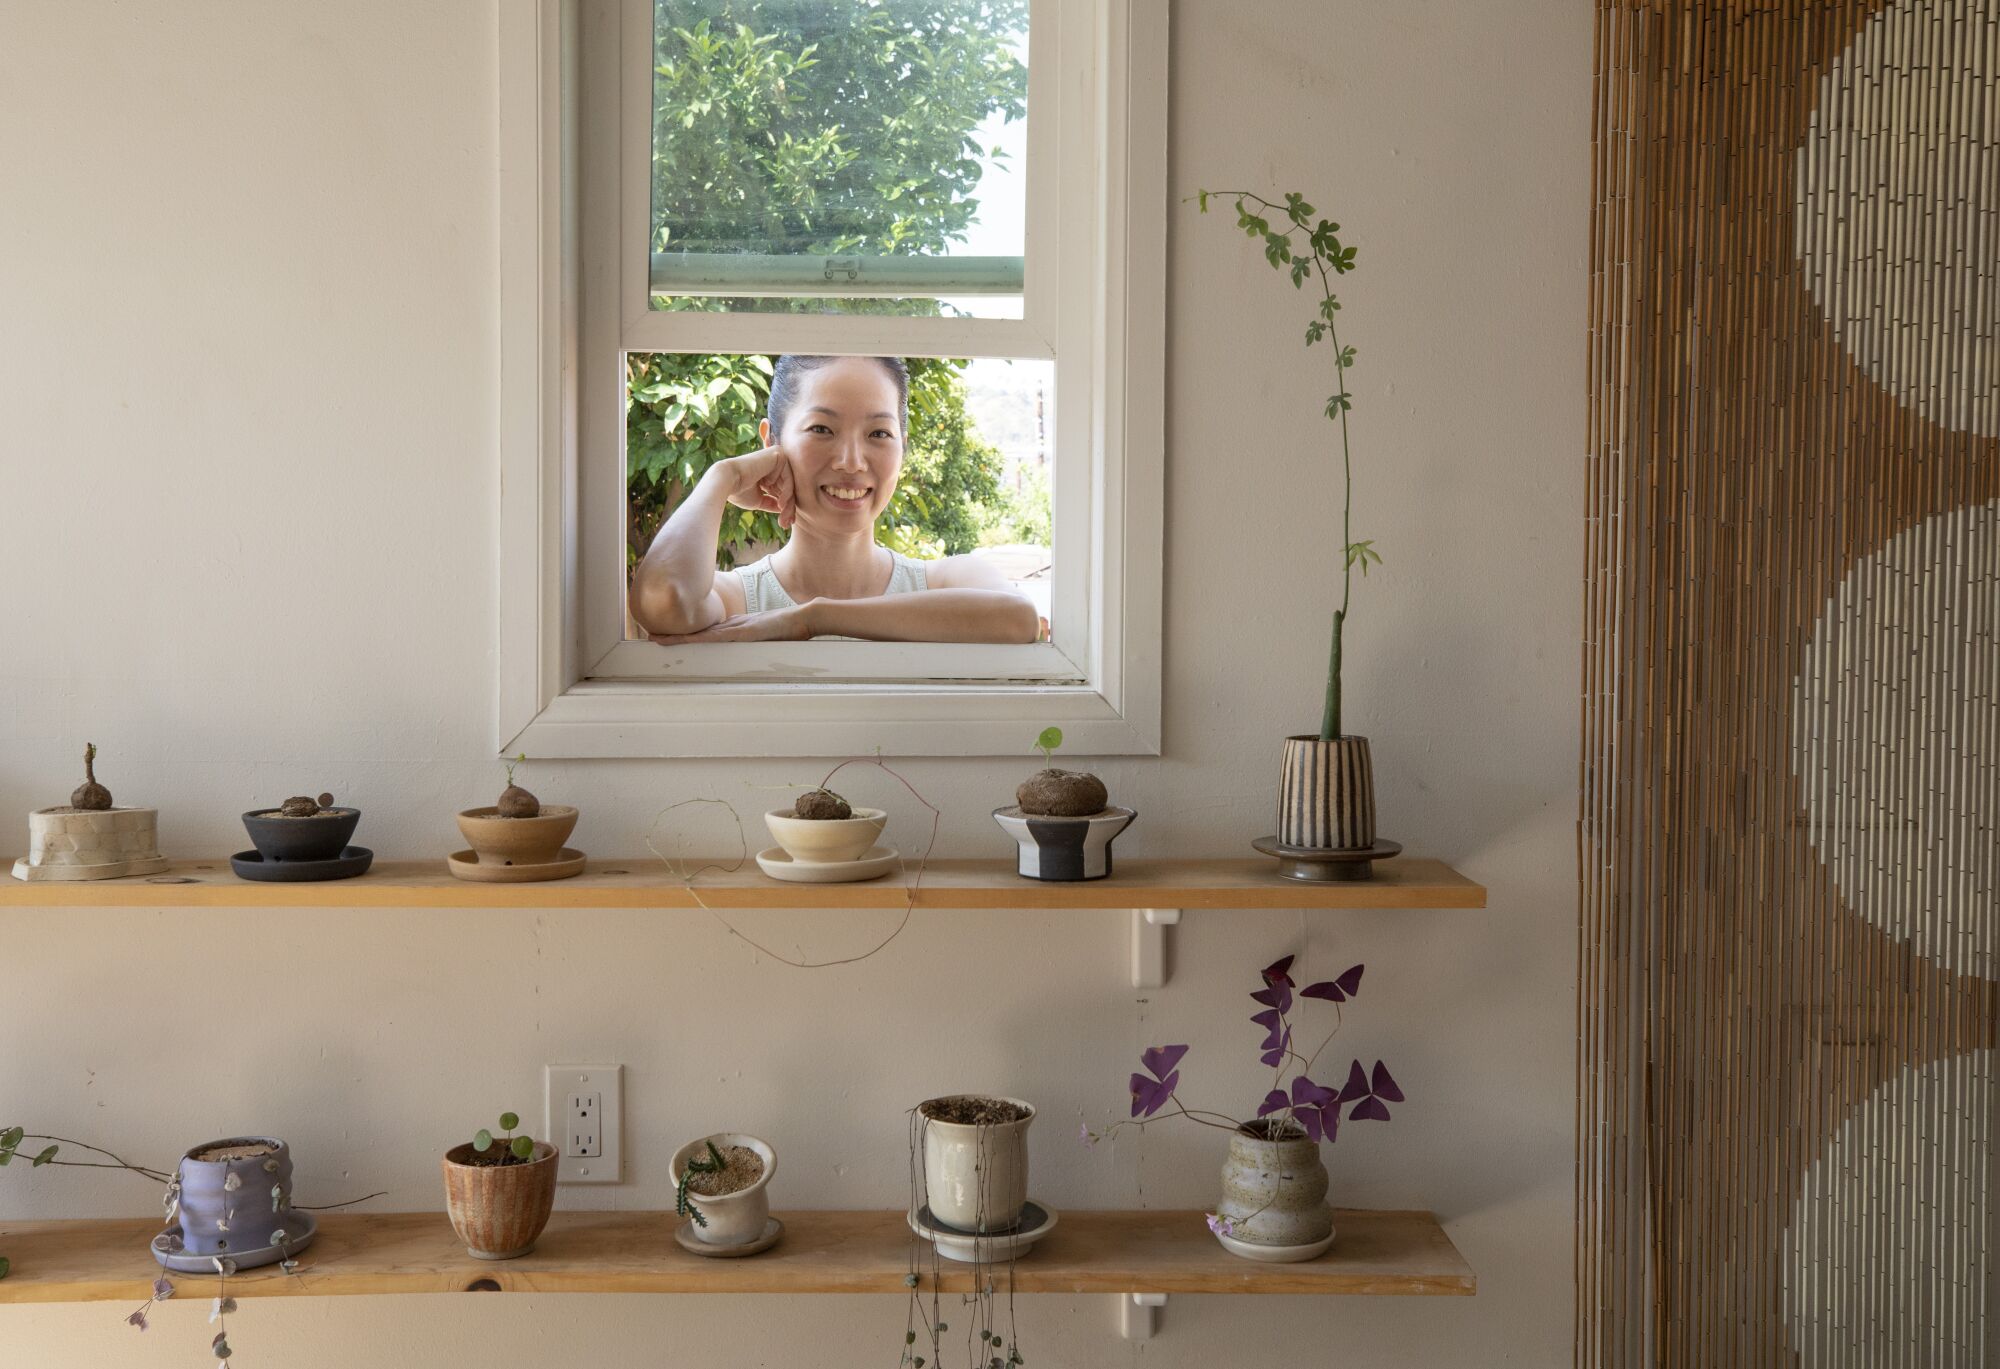 Mipa Shin is seen through a window with her planters in the foreground. 